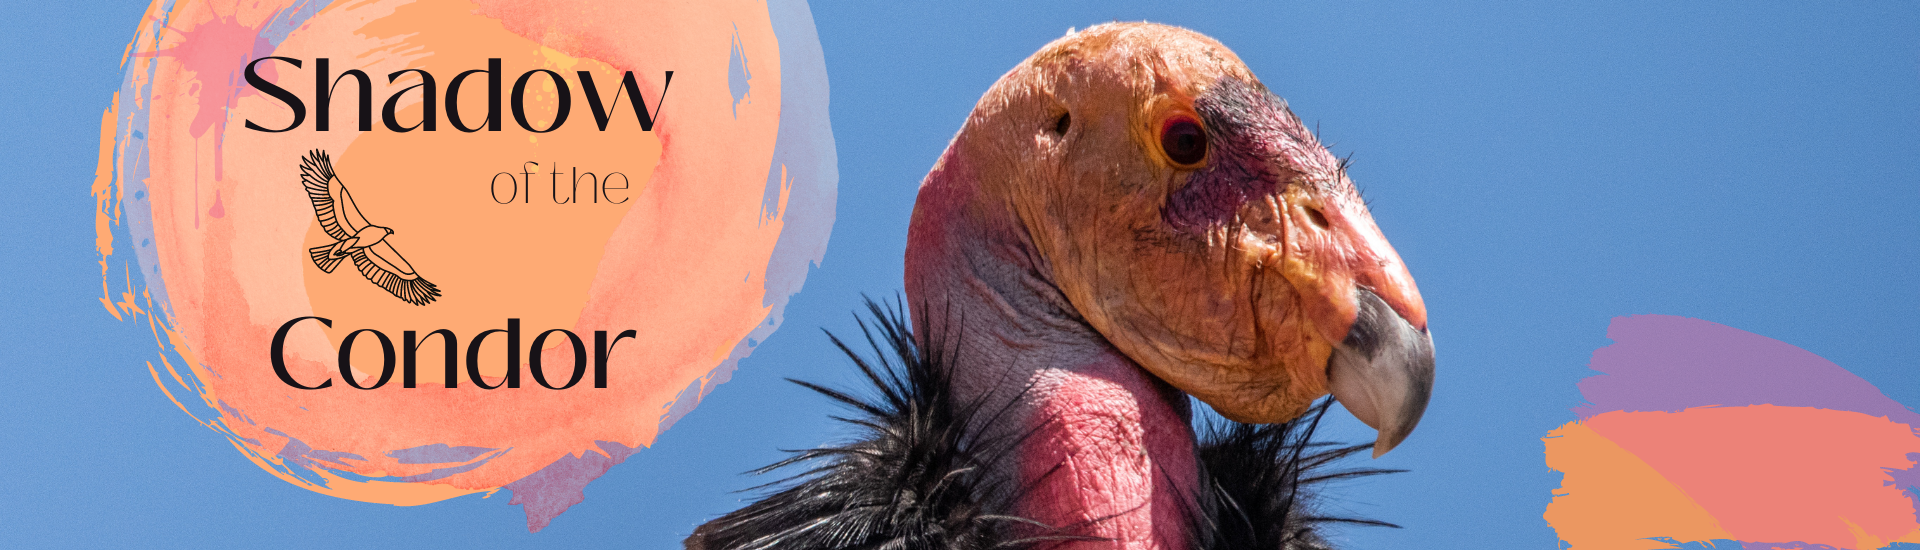 The head of a condor close up with a bright blue sky in the background. Text: Shadow of the Condor